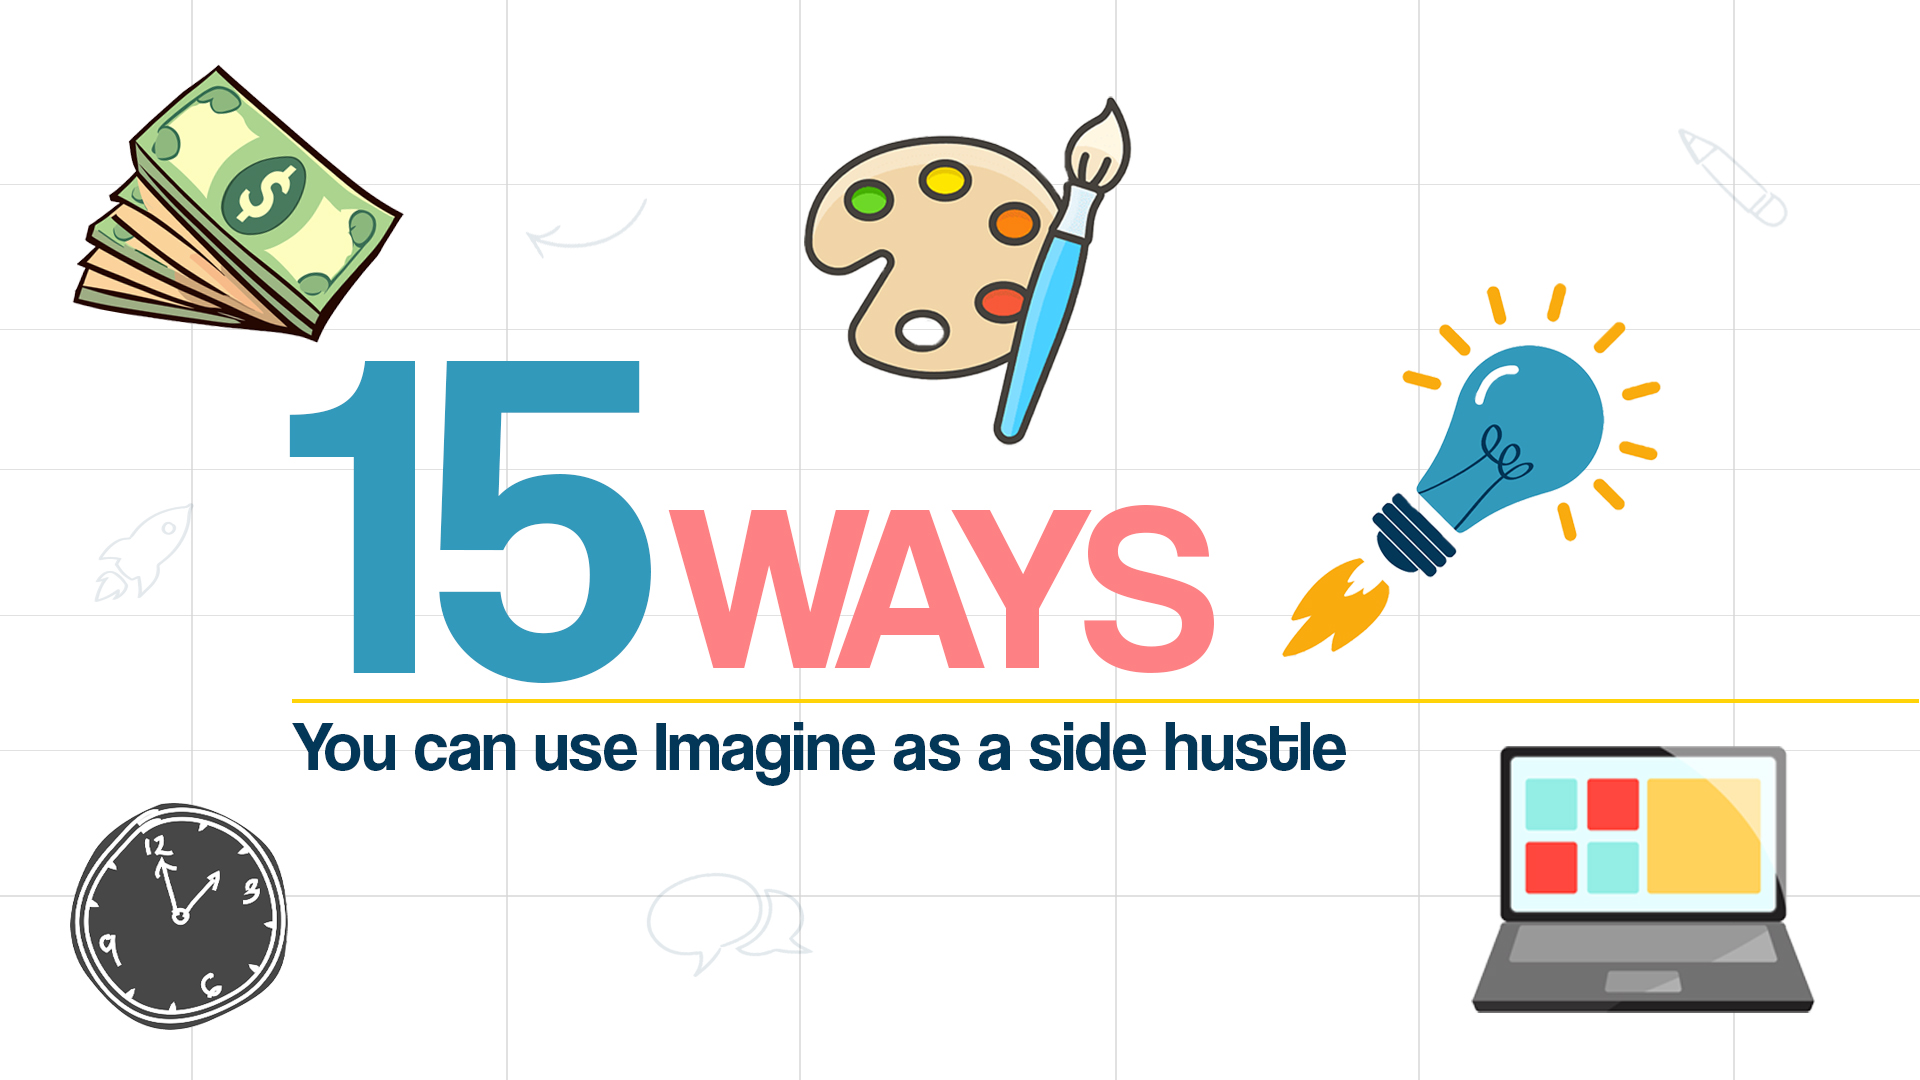 15 Ways You Can Use Imagine as a Side Hustle